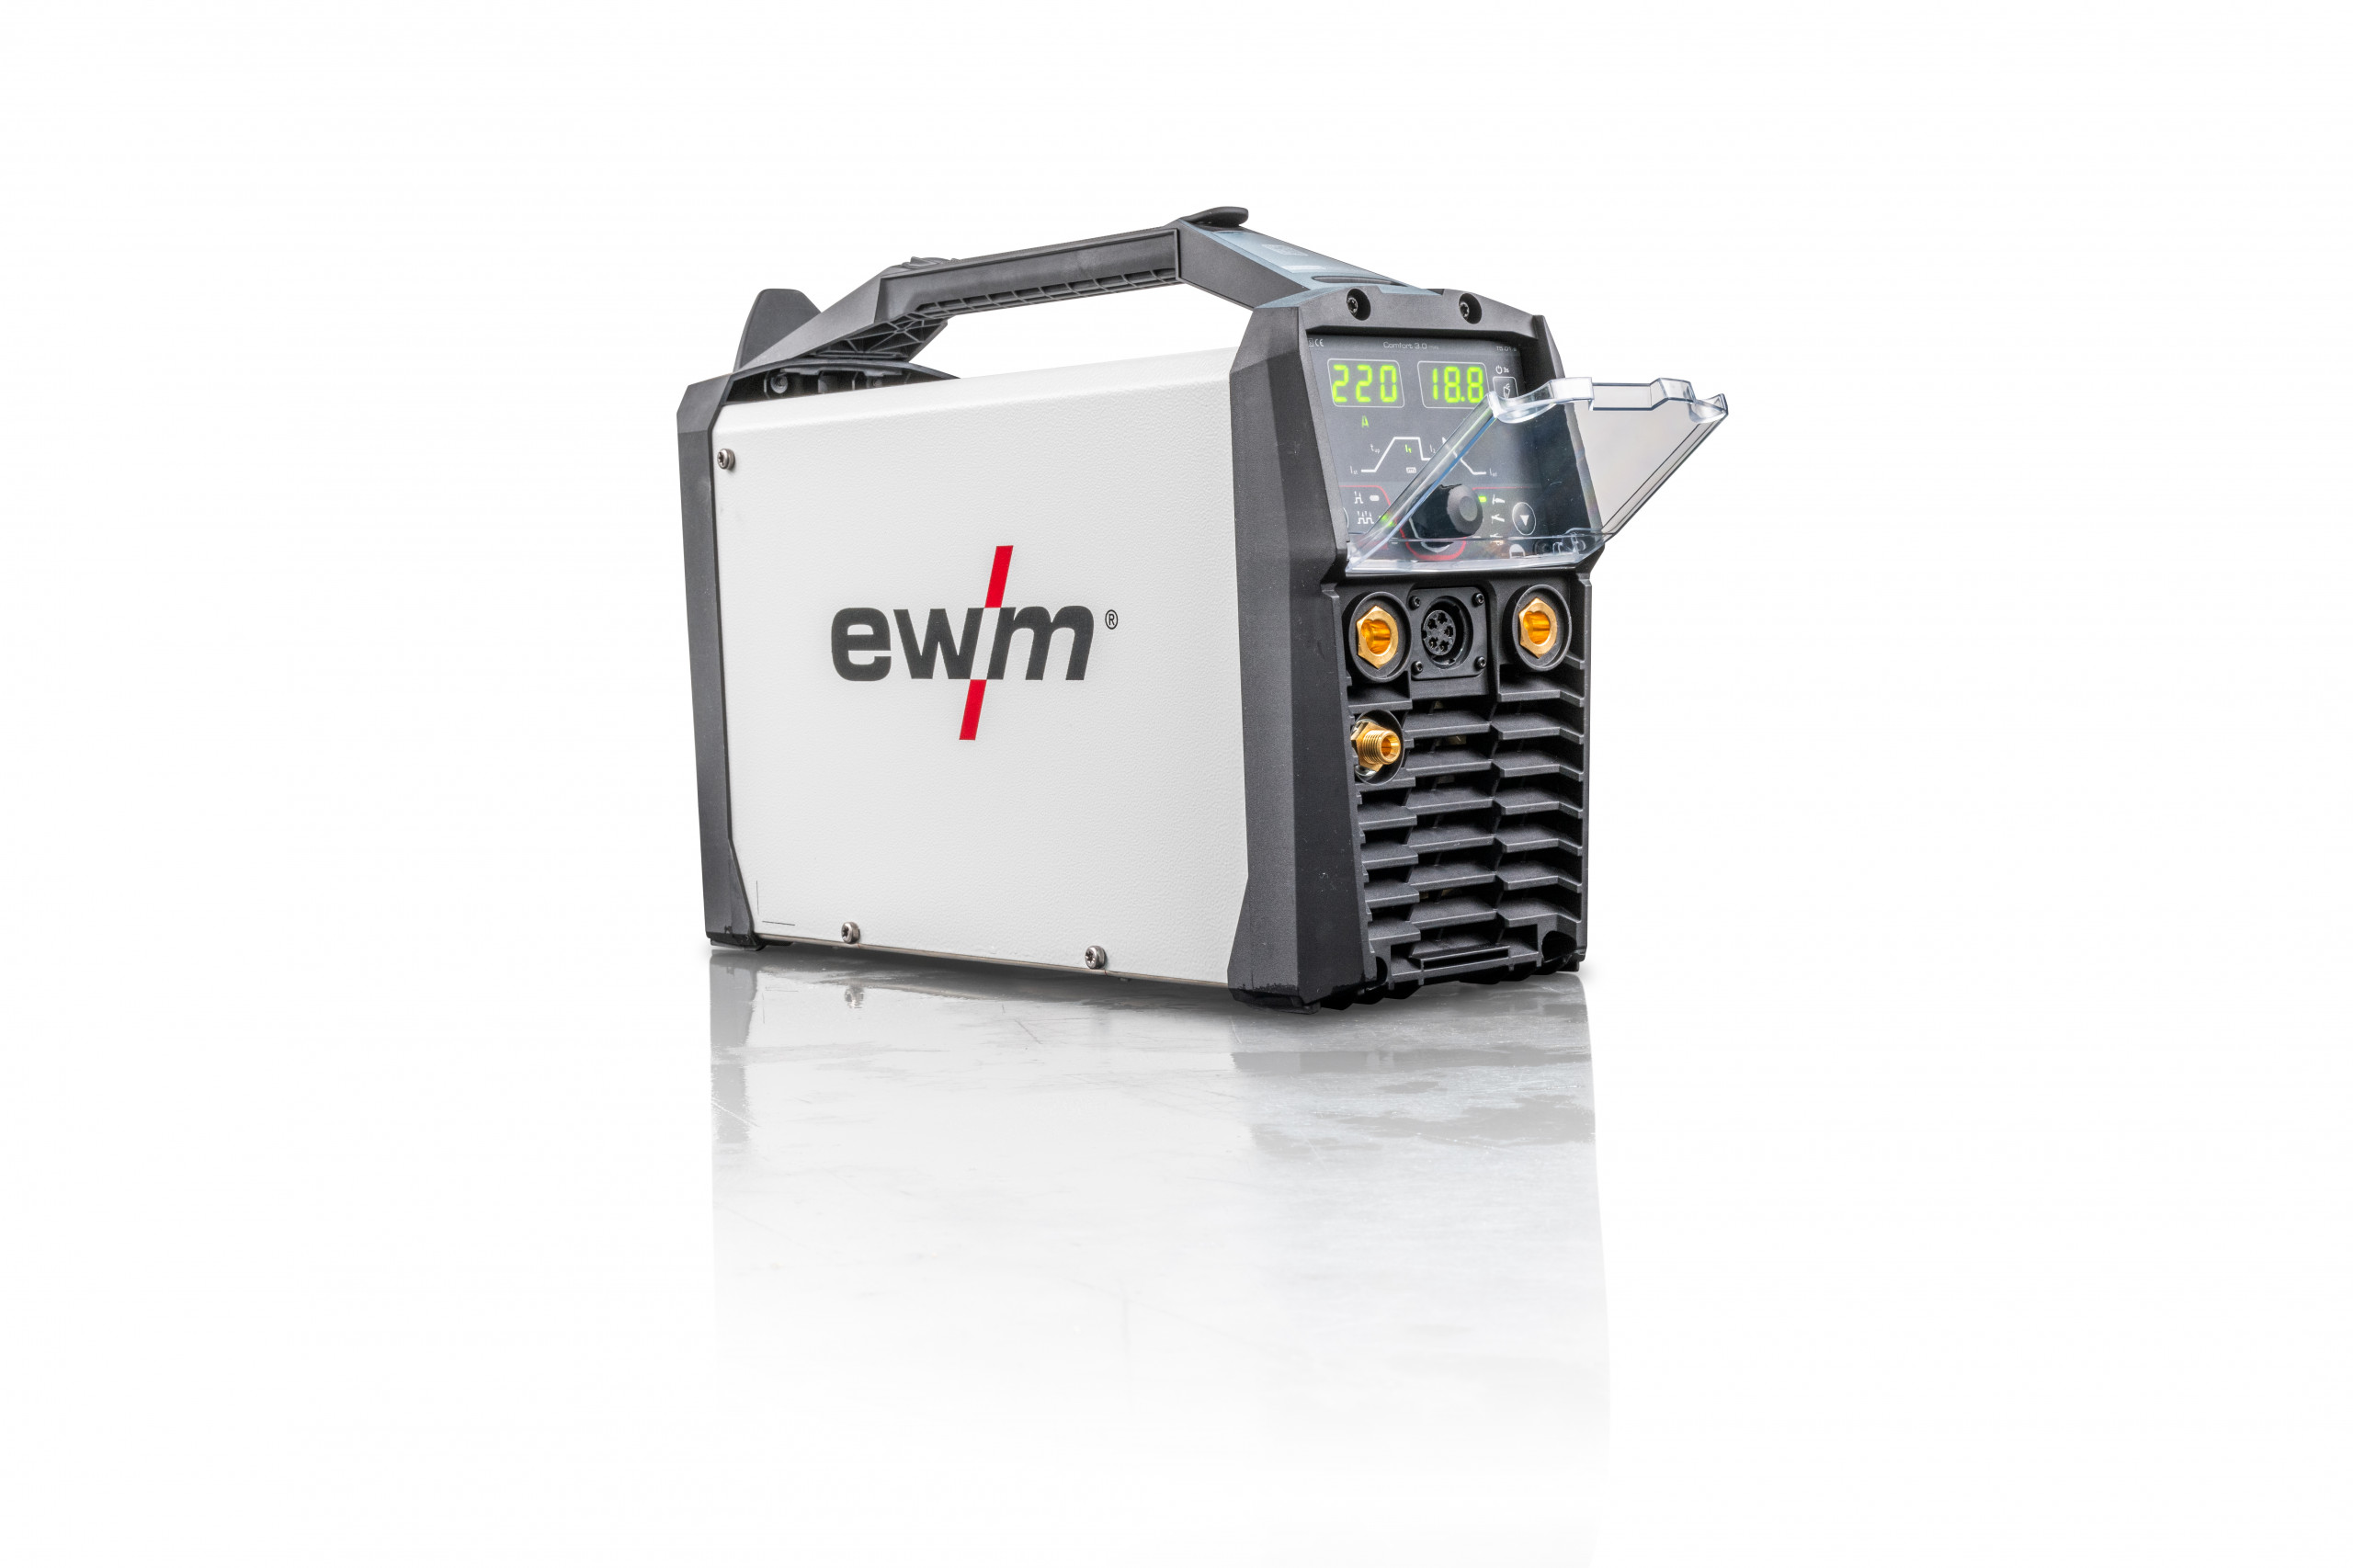 The new Picotig 220 puls DC from EWM scores with its robust design and low weight of only about ten kilograms. The welding machine offers maximum efficiency, even for demanding welding tasks. © EWM GmbH